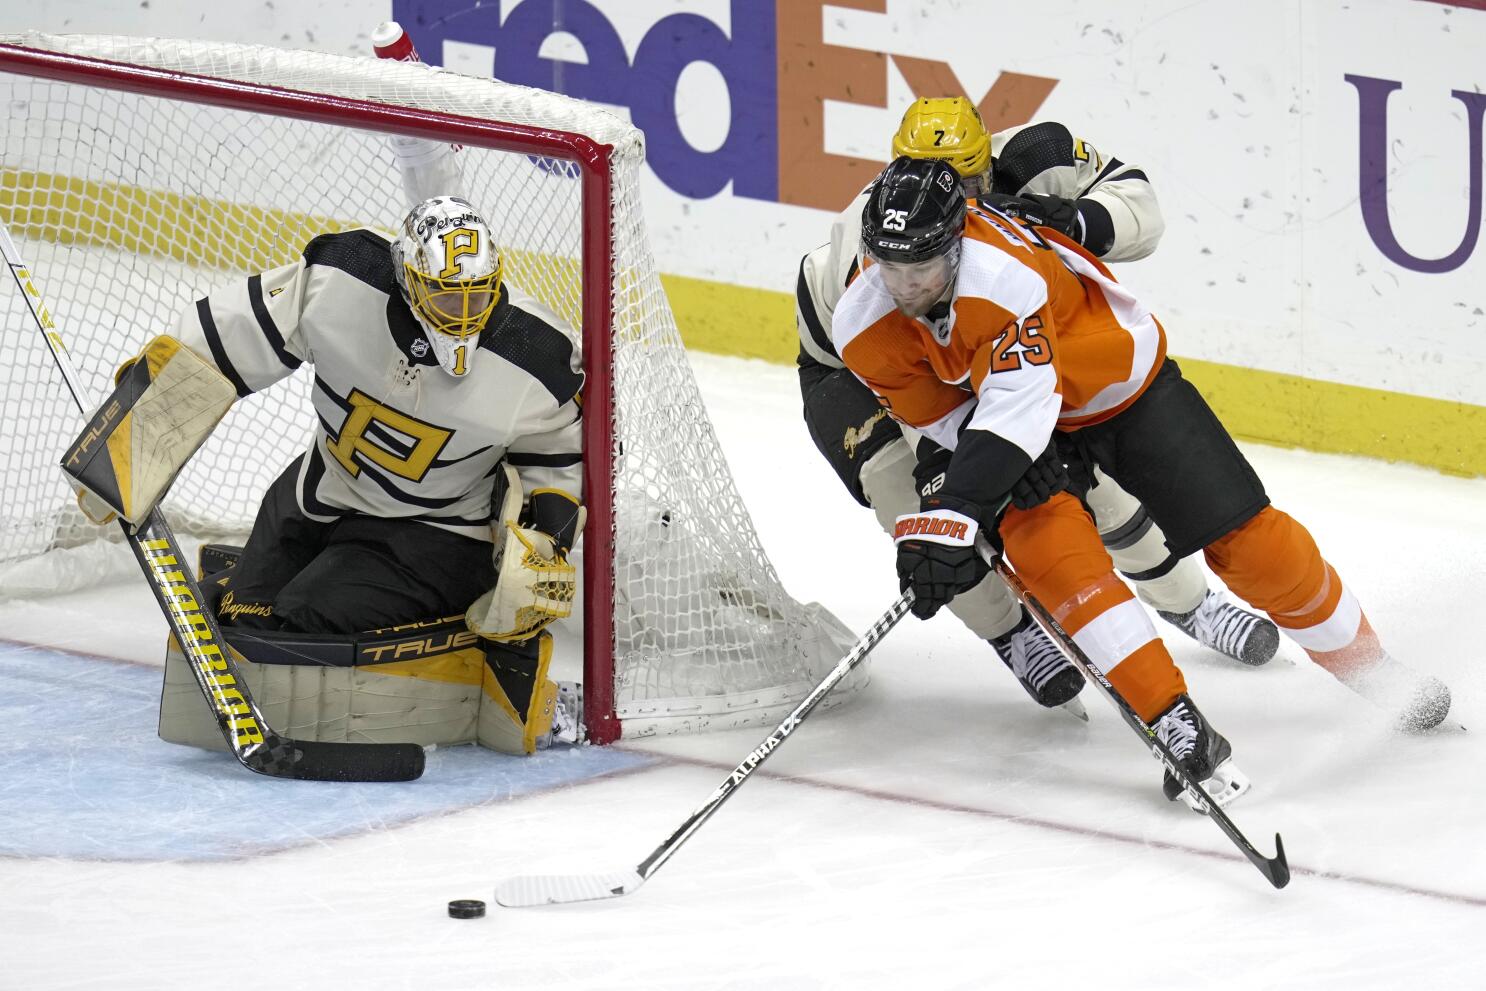 Flyers Fall to Penguins on Letang's Reviewed Goal in OT